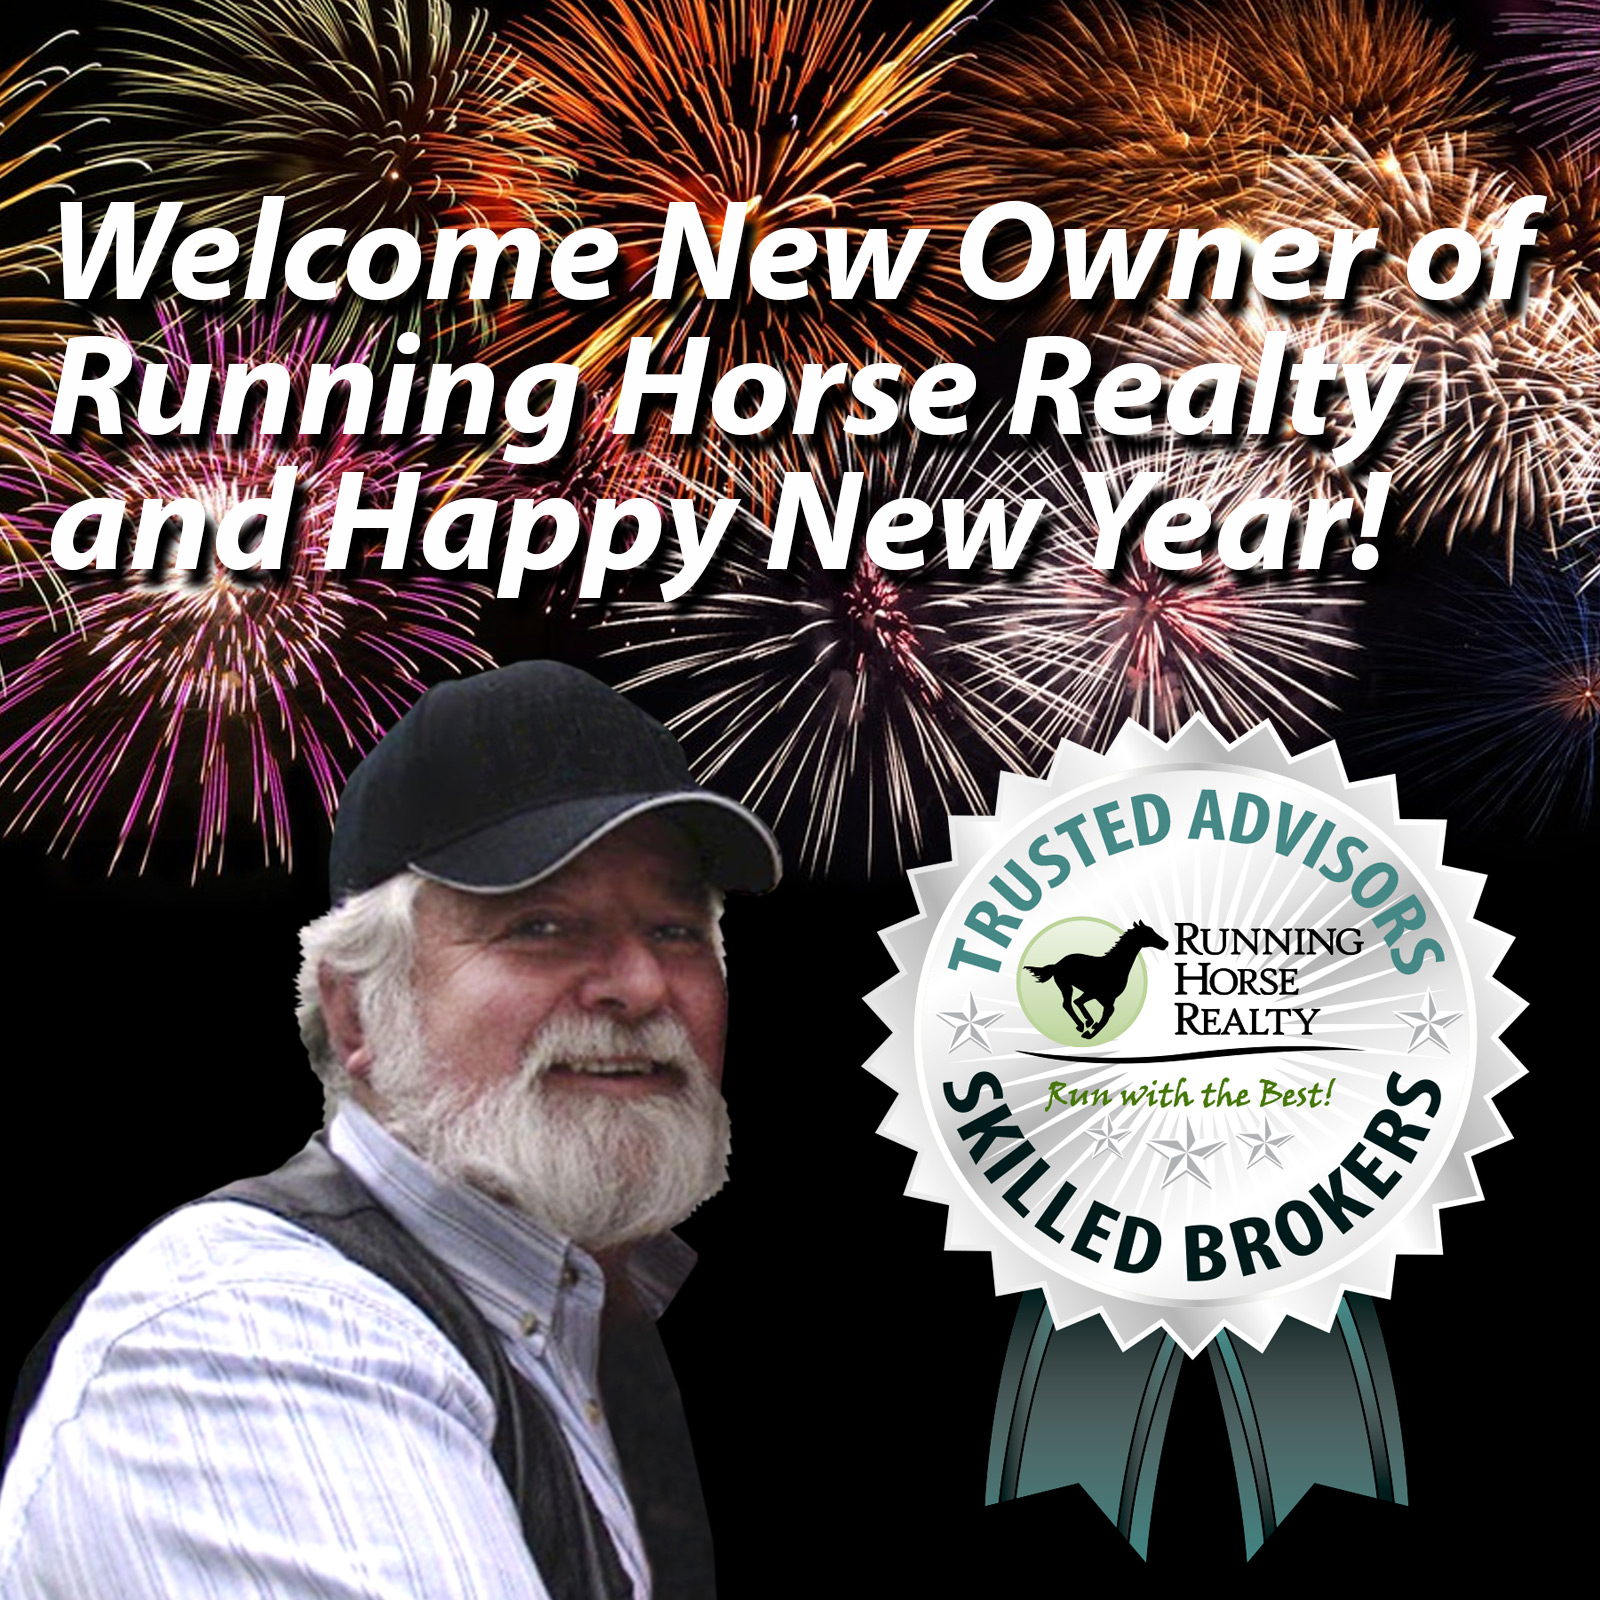 New Owner Running horse Realty